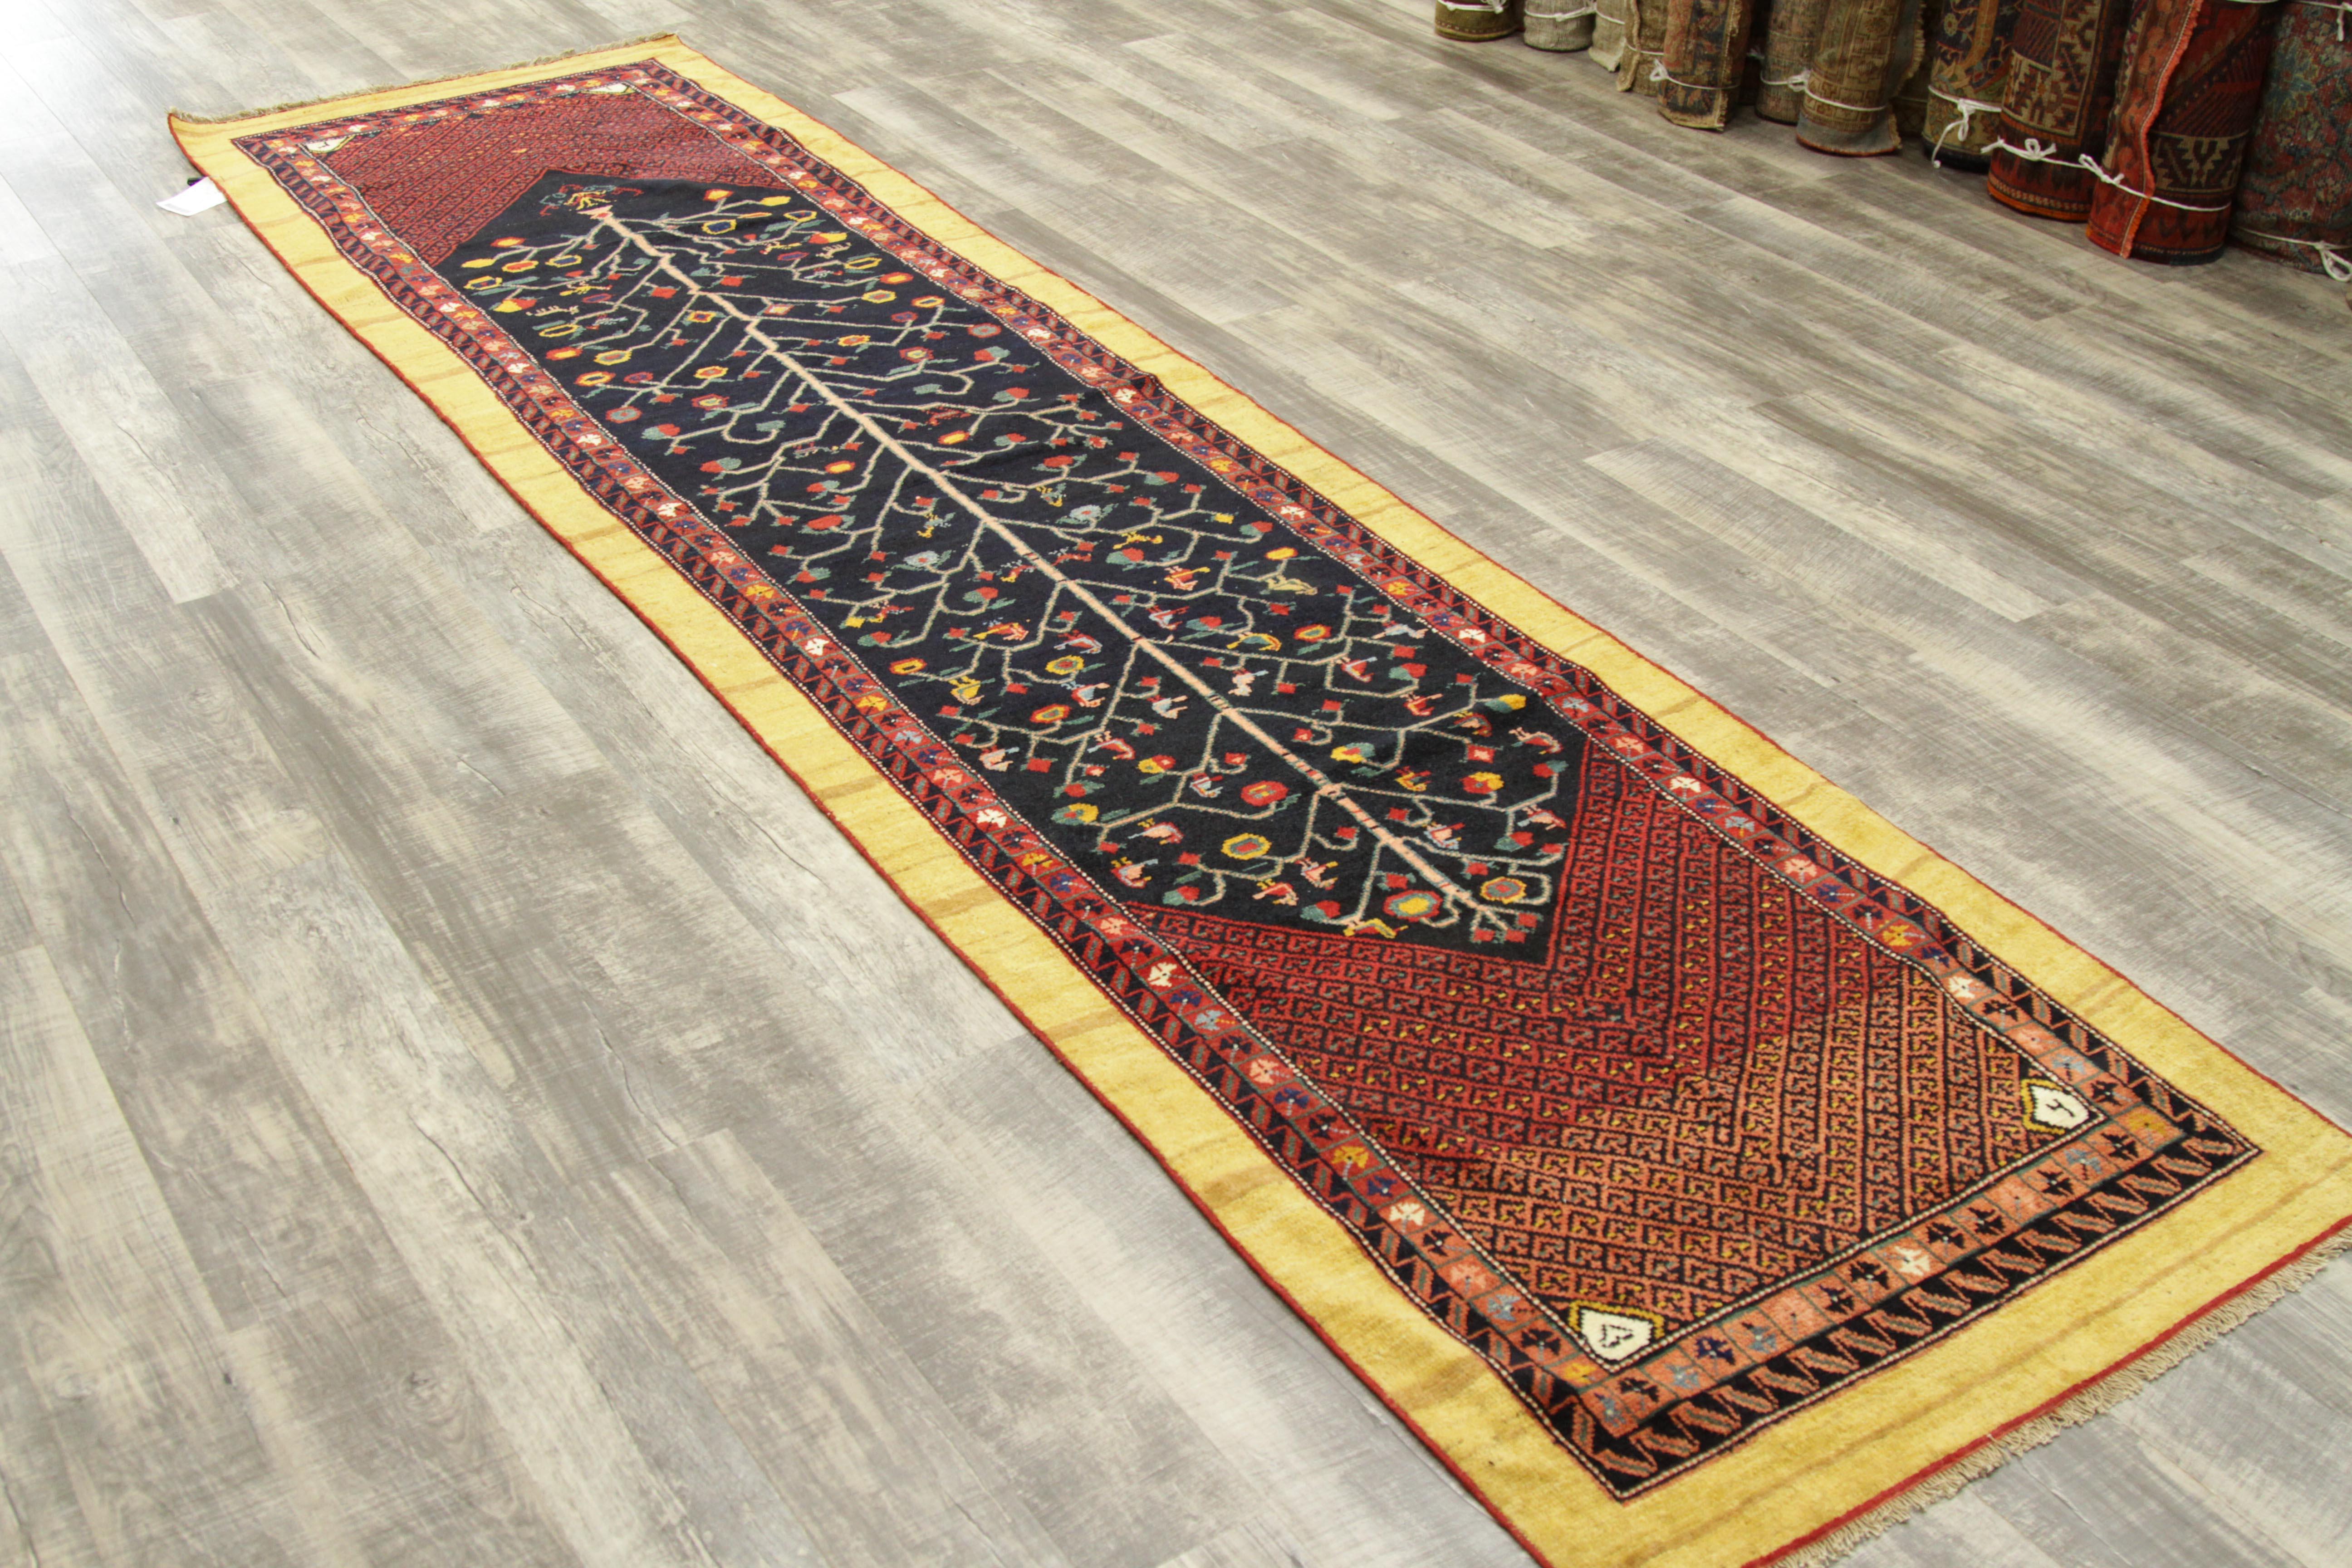 Other 1920s Antique Persian Rug Bakhtiari Style with Animal and Geometric Patterns For Sale